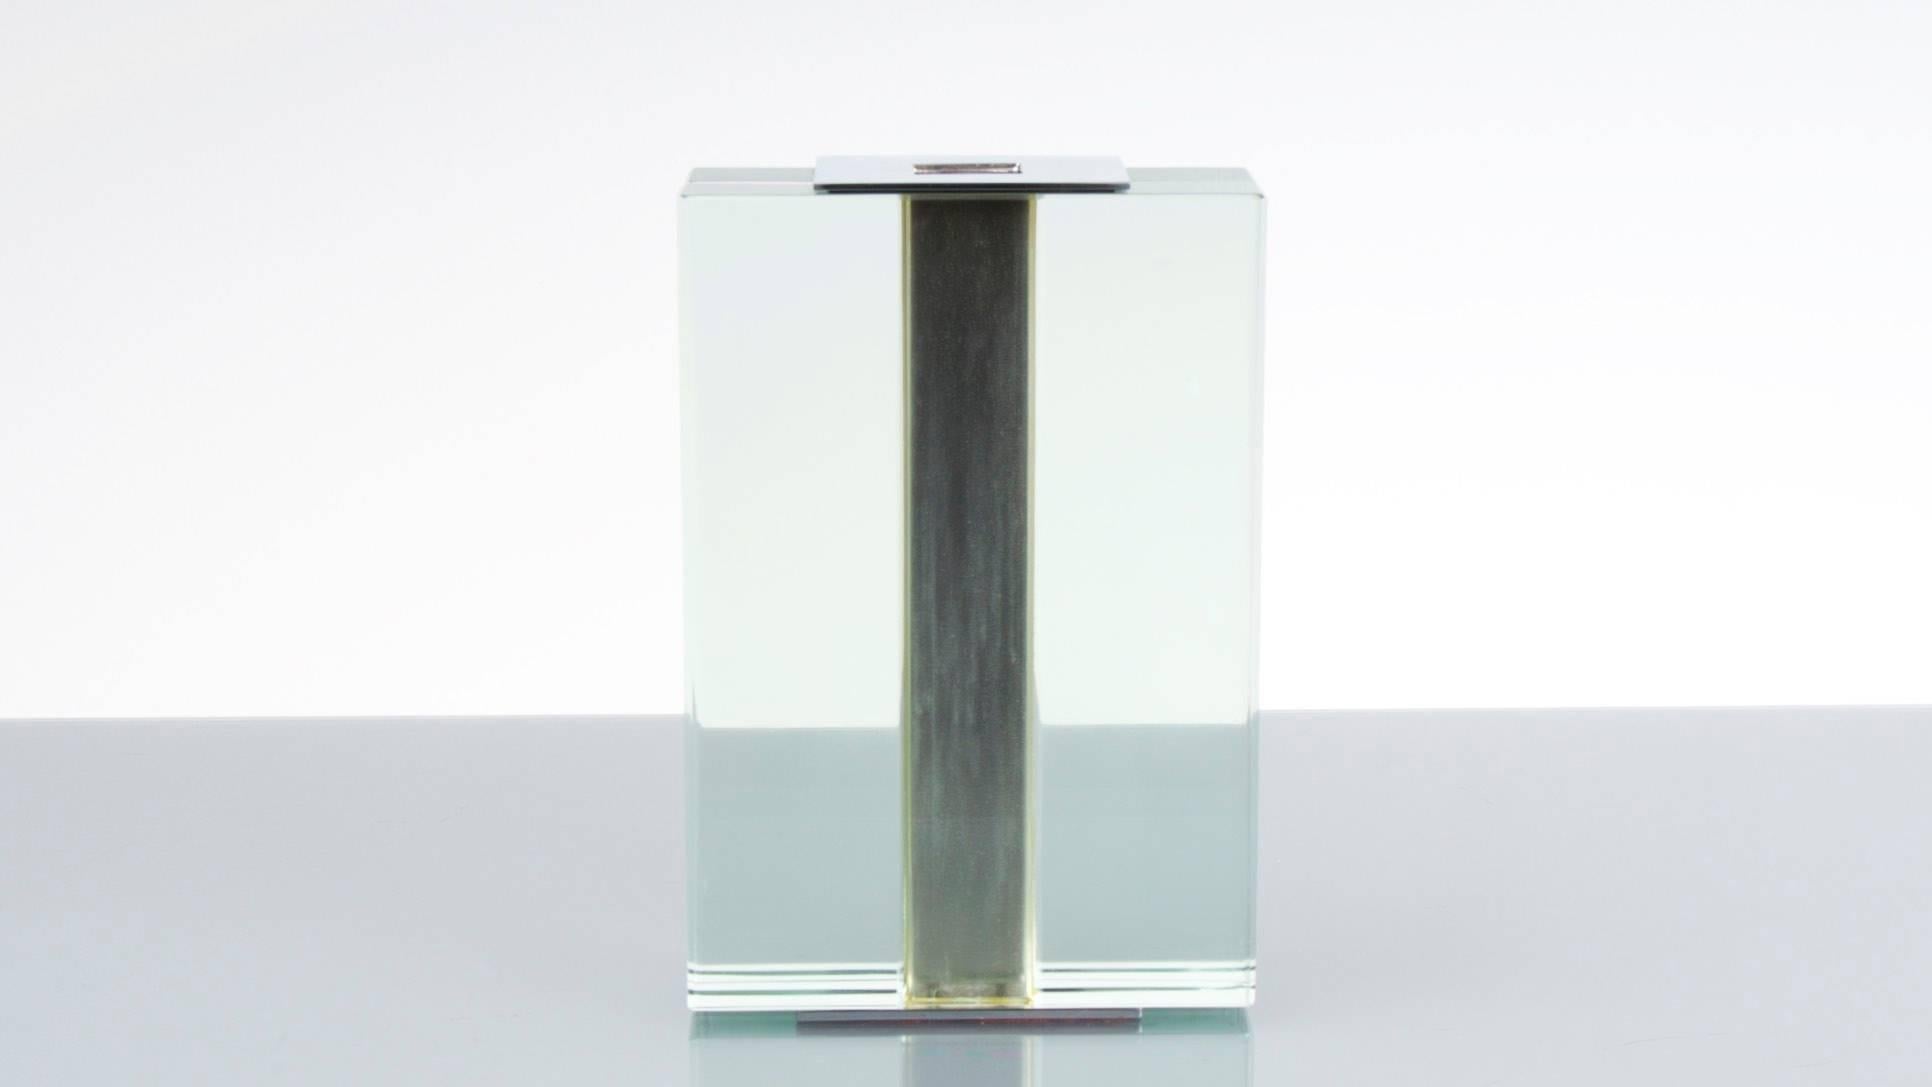 A Fontana Arte glass soliflore vase model 2393 in the 1950s.
The vase is in perfect condition.